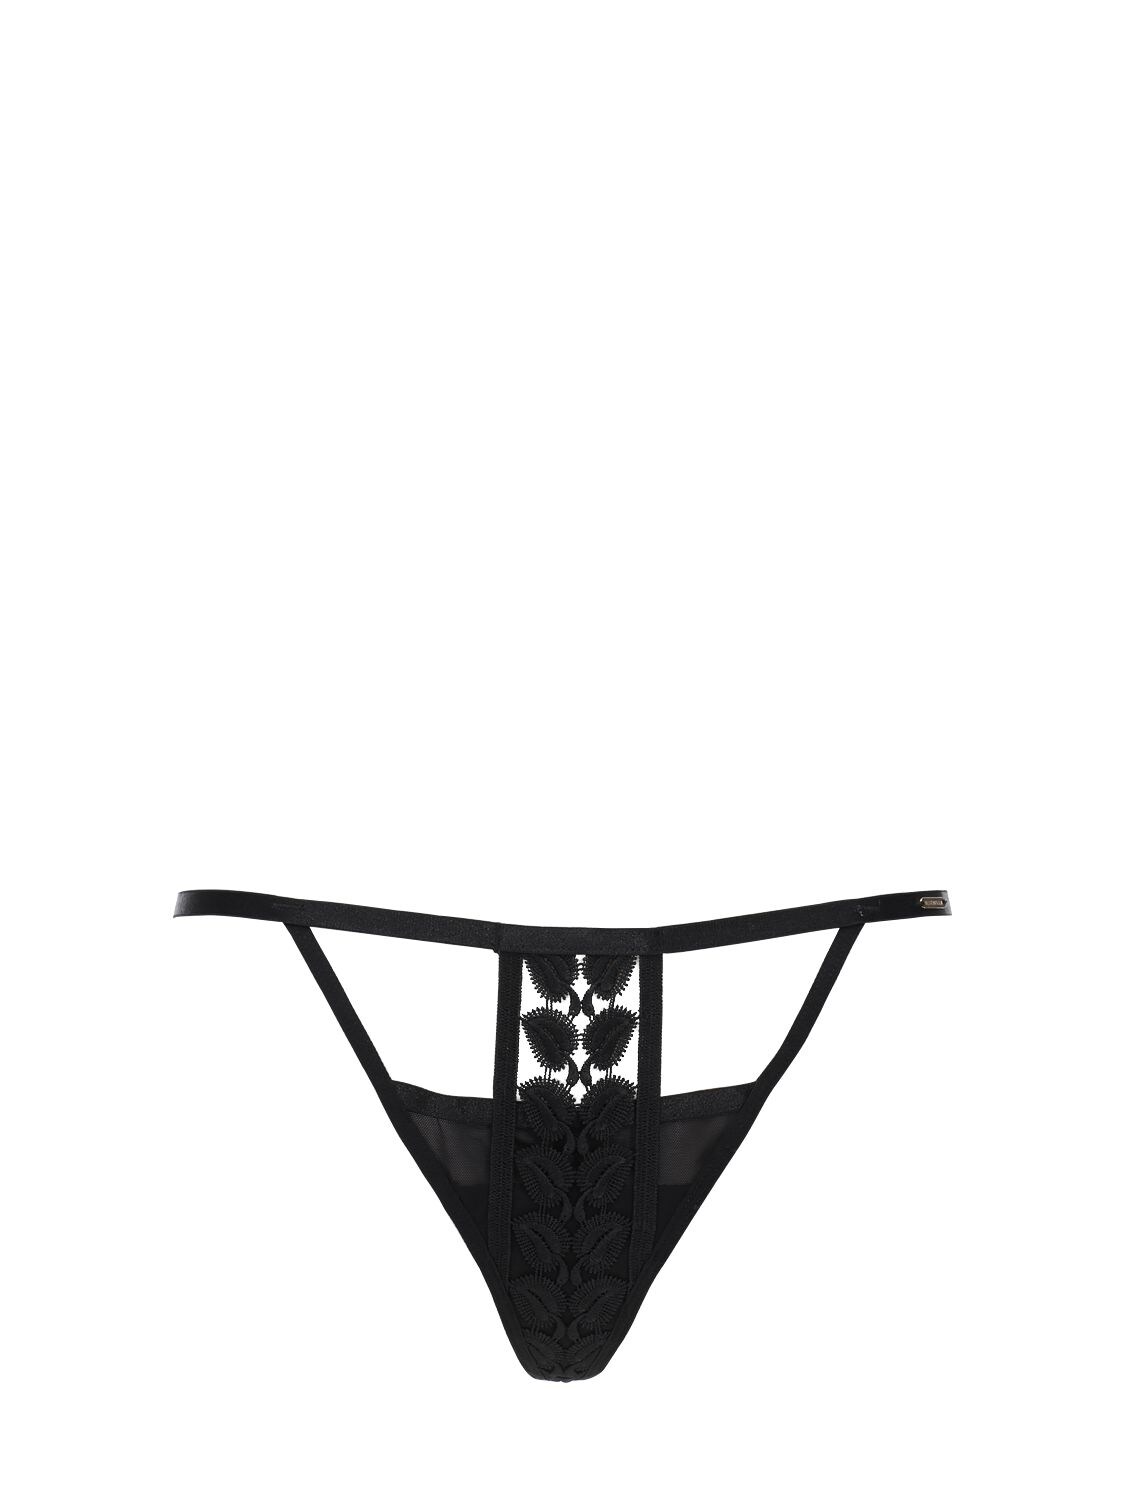 Bluebella Alix Lace Thong In Black